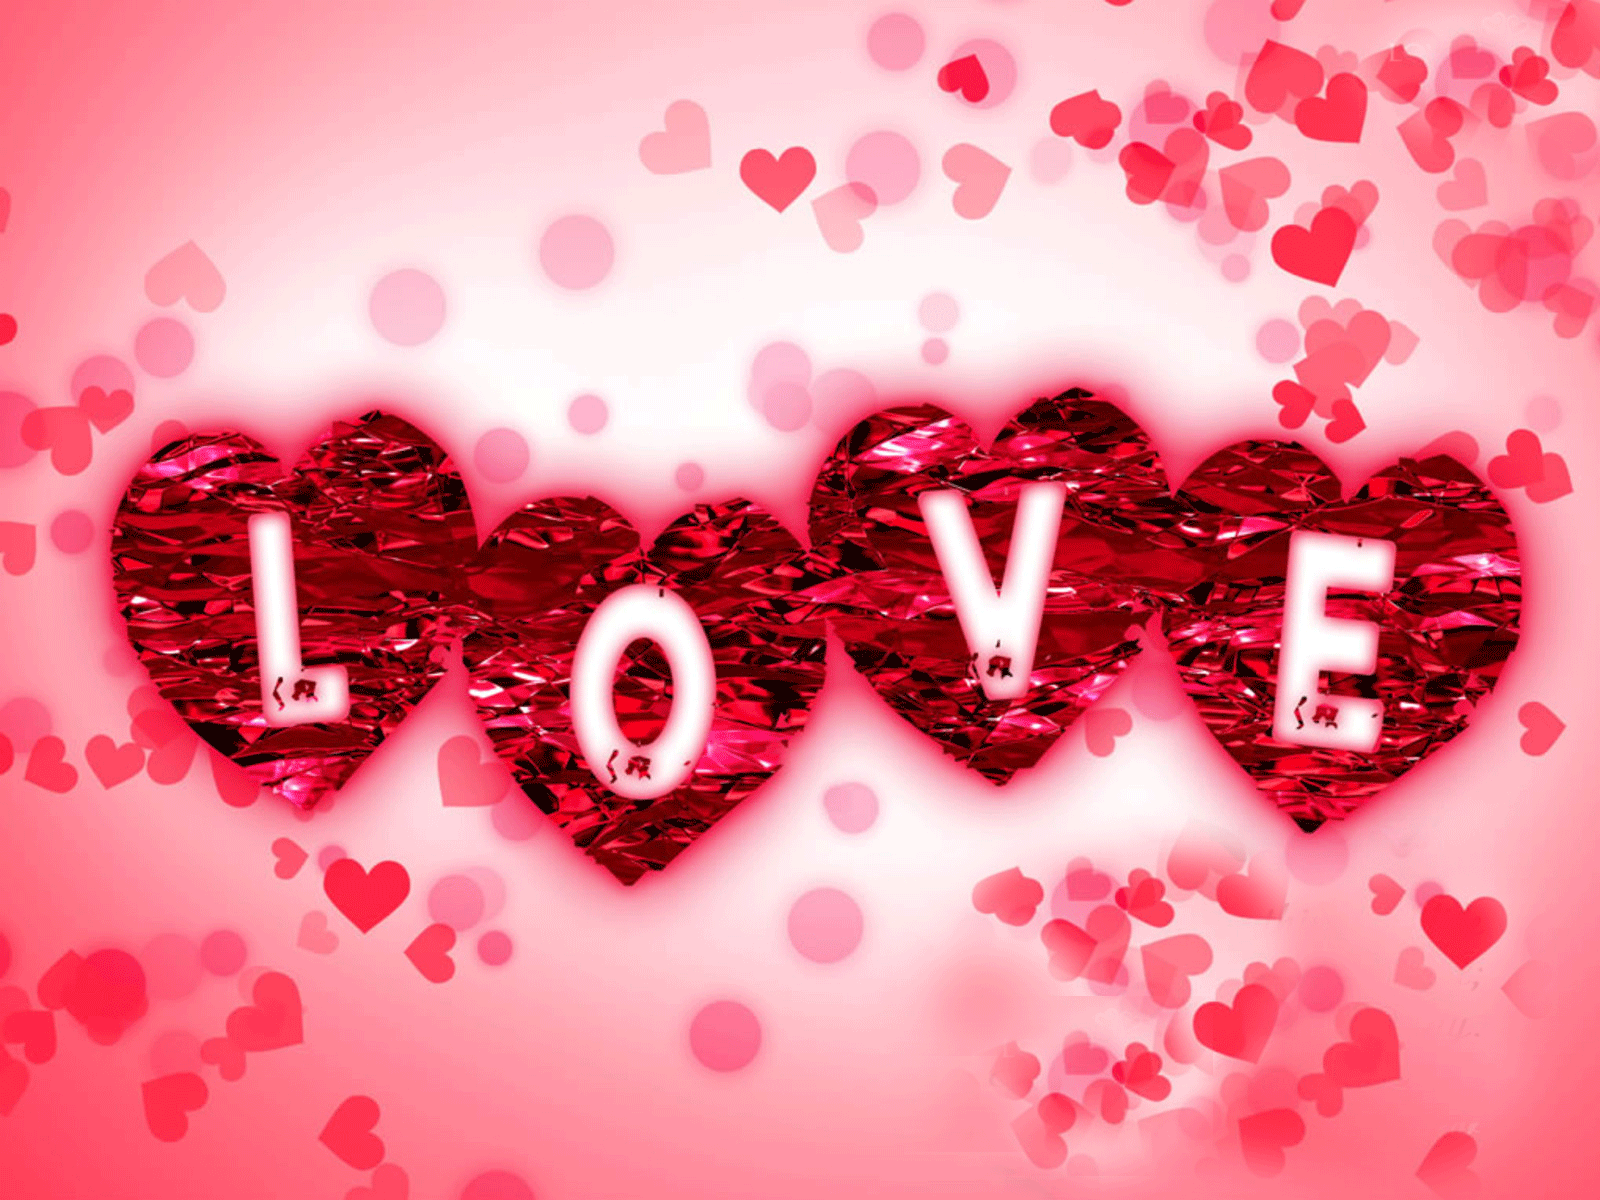 Love Hd Wallpaper Love Heart Picture Love Pictures Love HD Wallpapers Download Free Map Images Wallpaper [wallpaper376.blogspot.com]